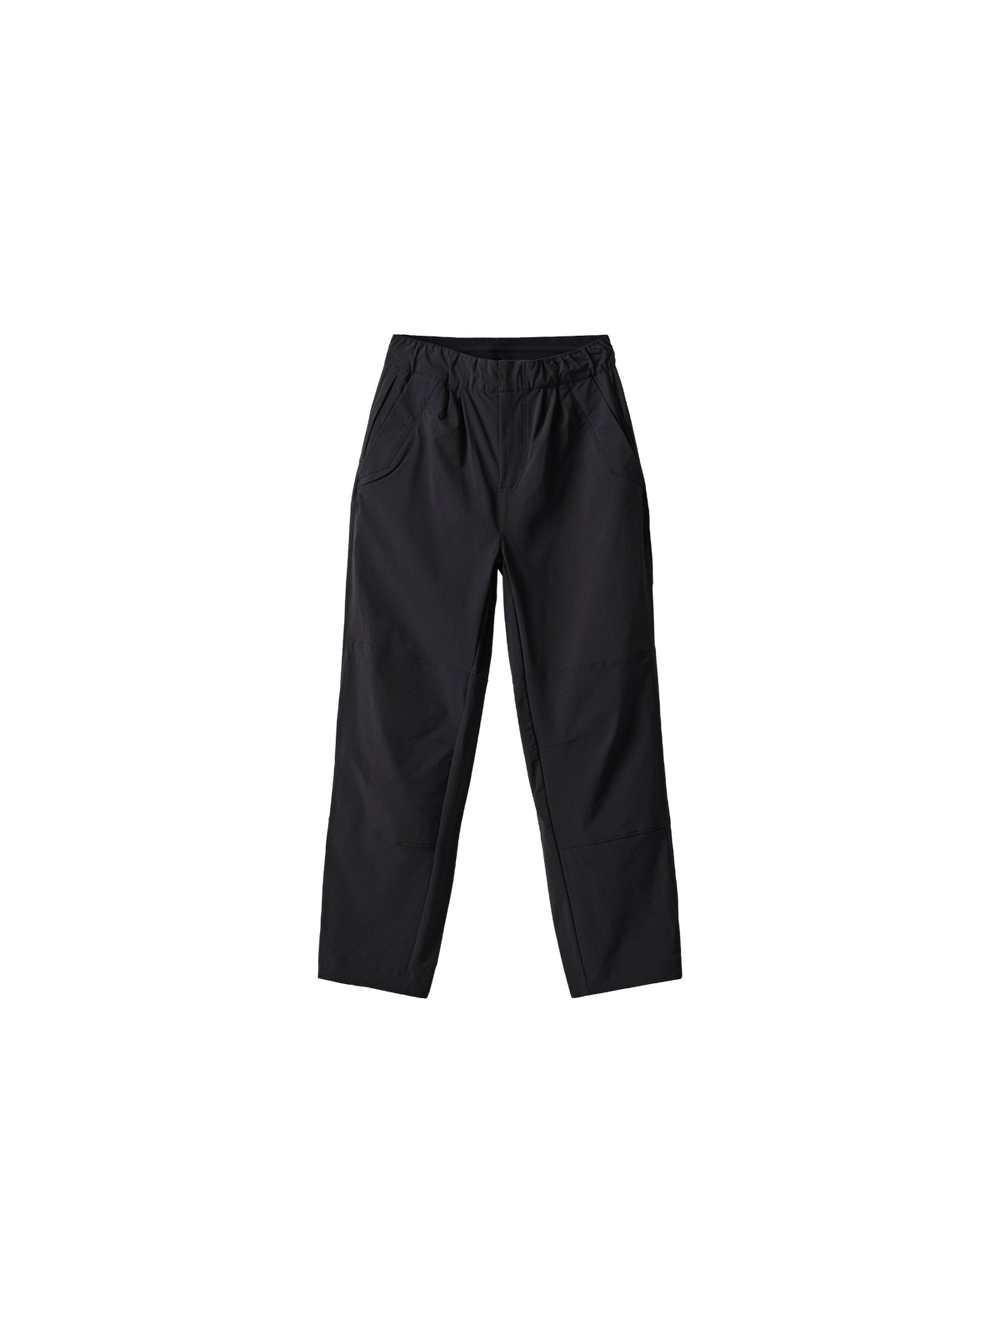 Product Image for Women's Motion Pant